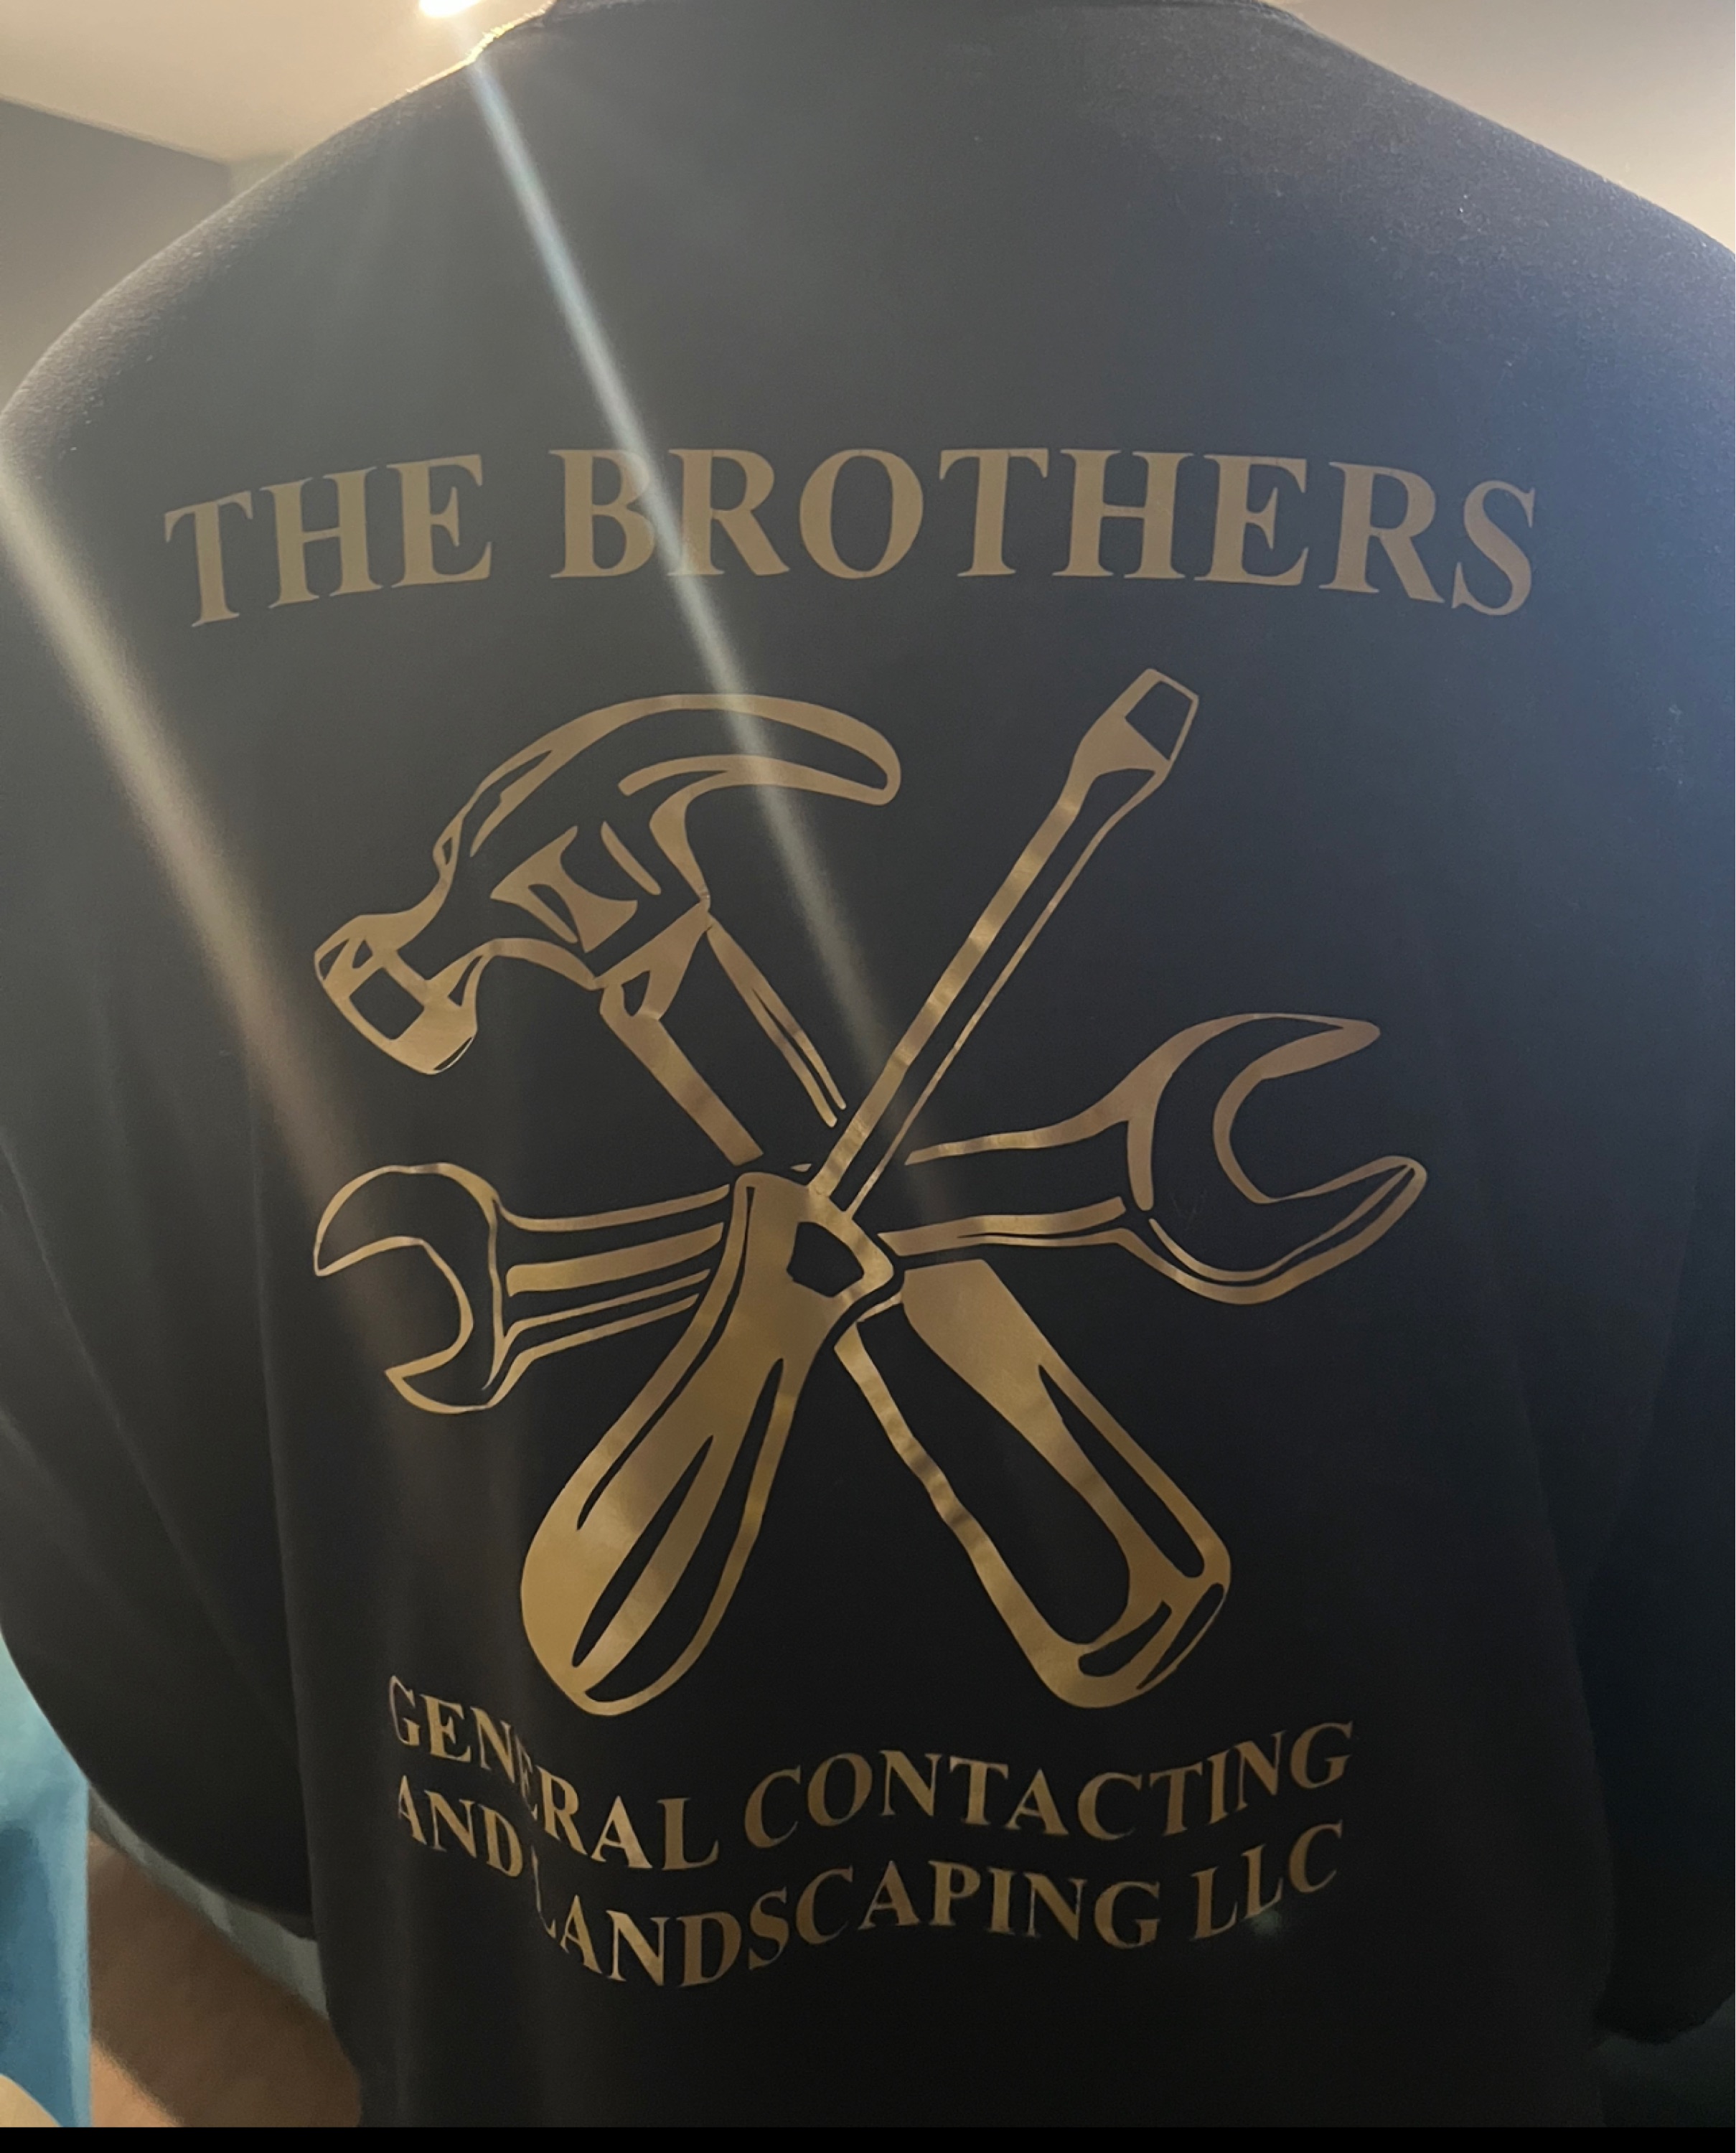 The Brothers General Contracting and Landscaping Logo